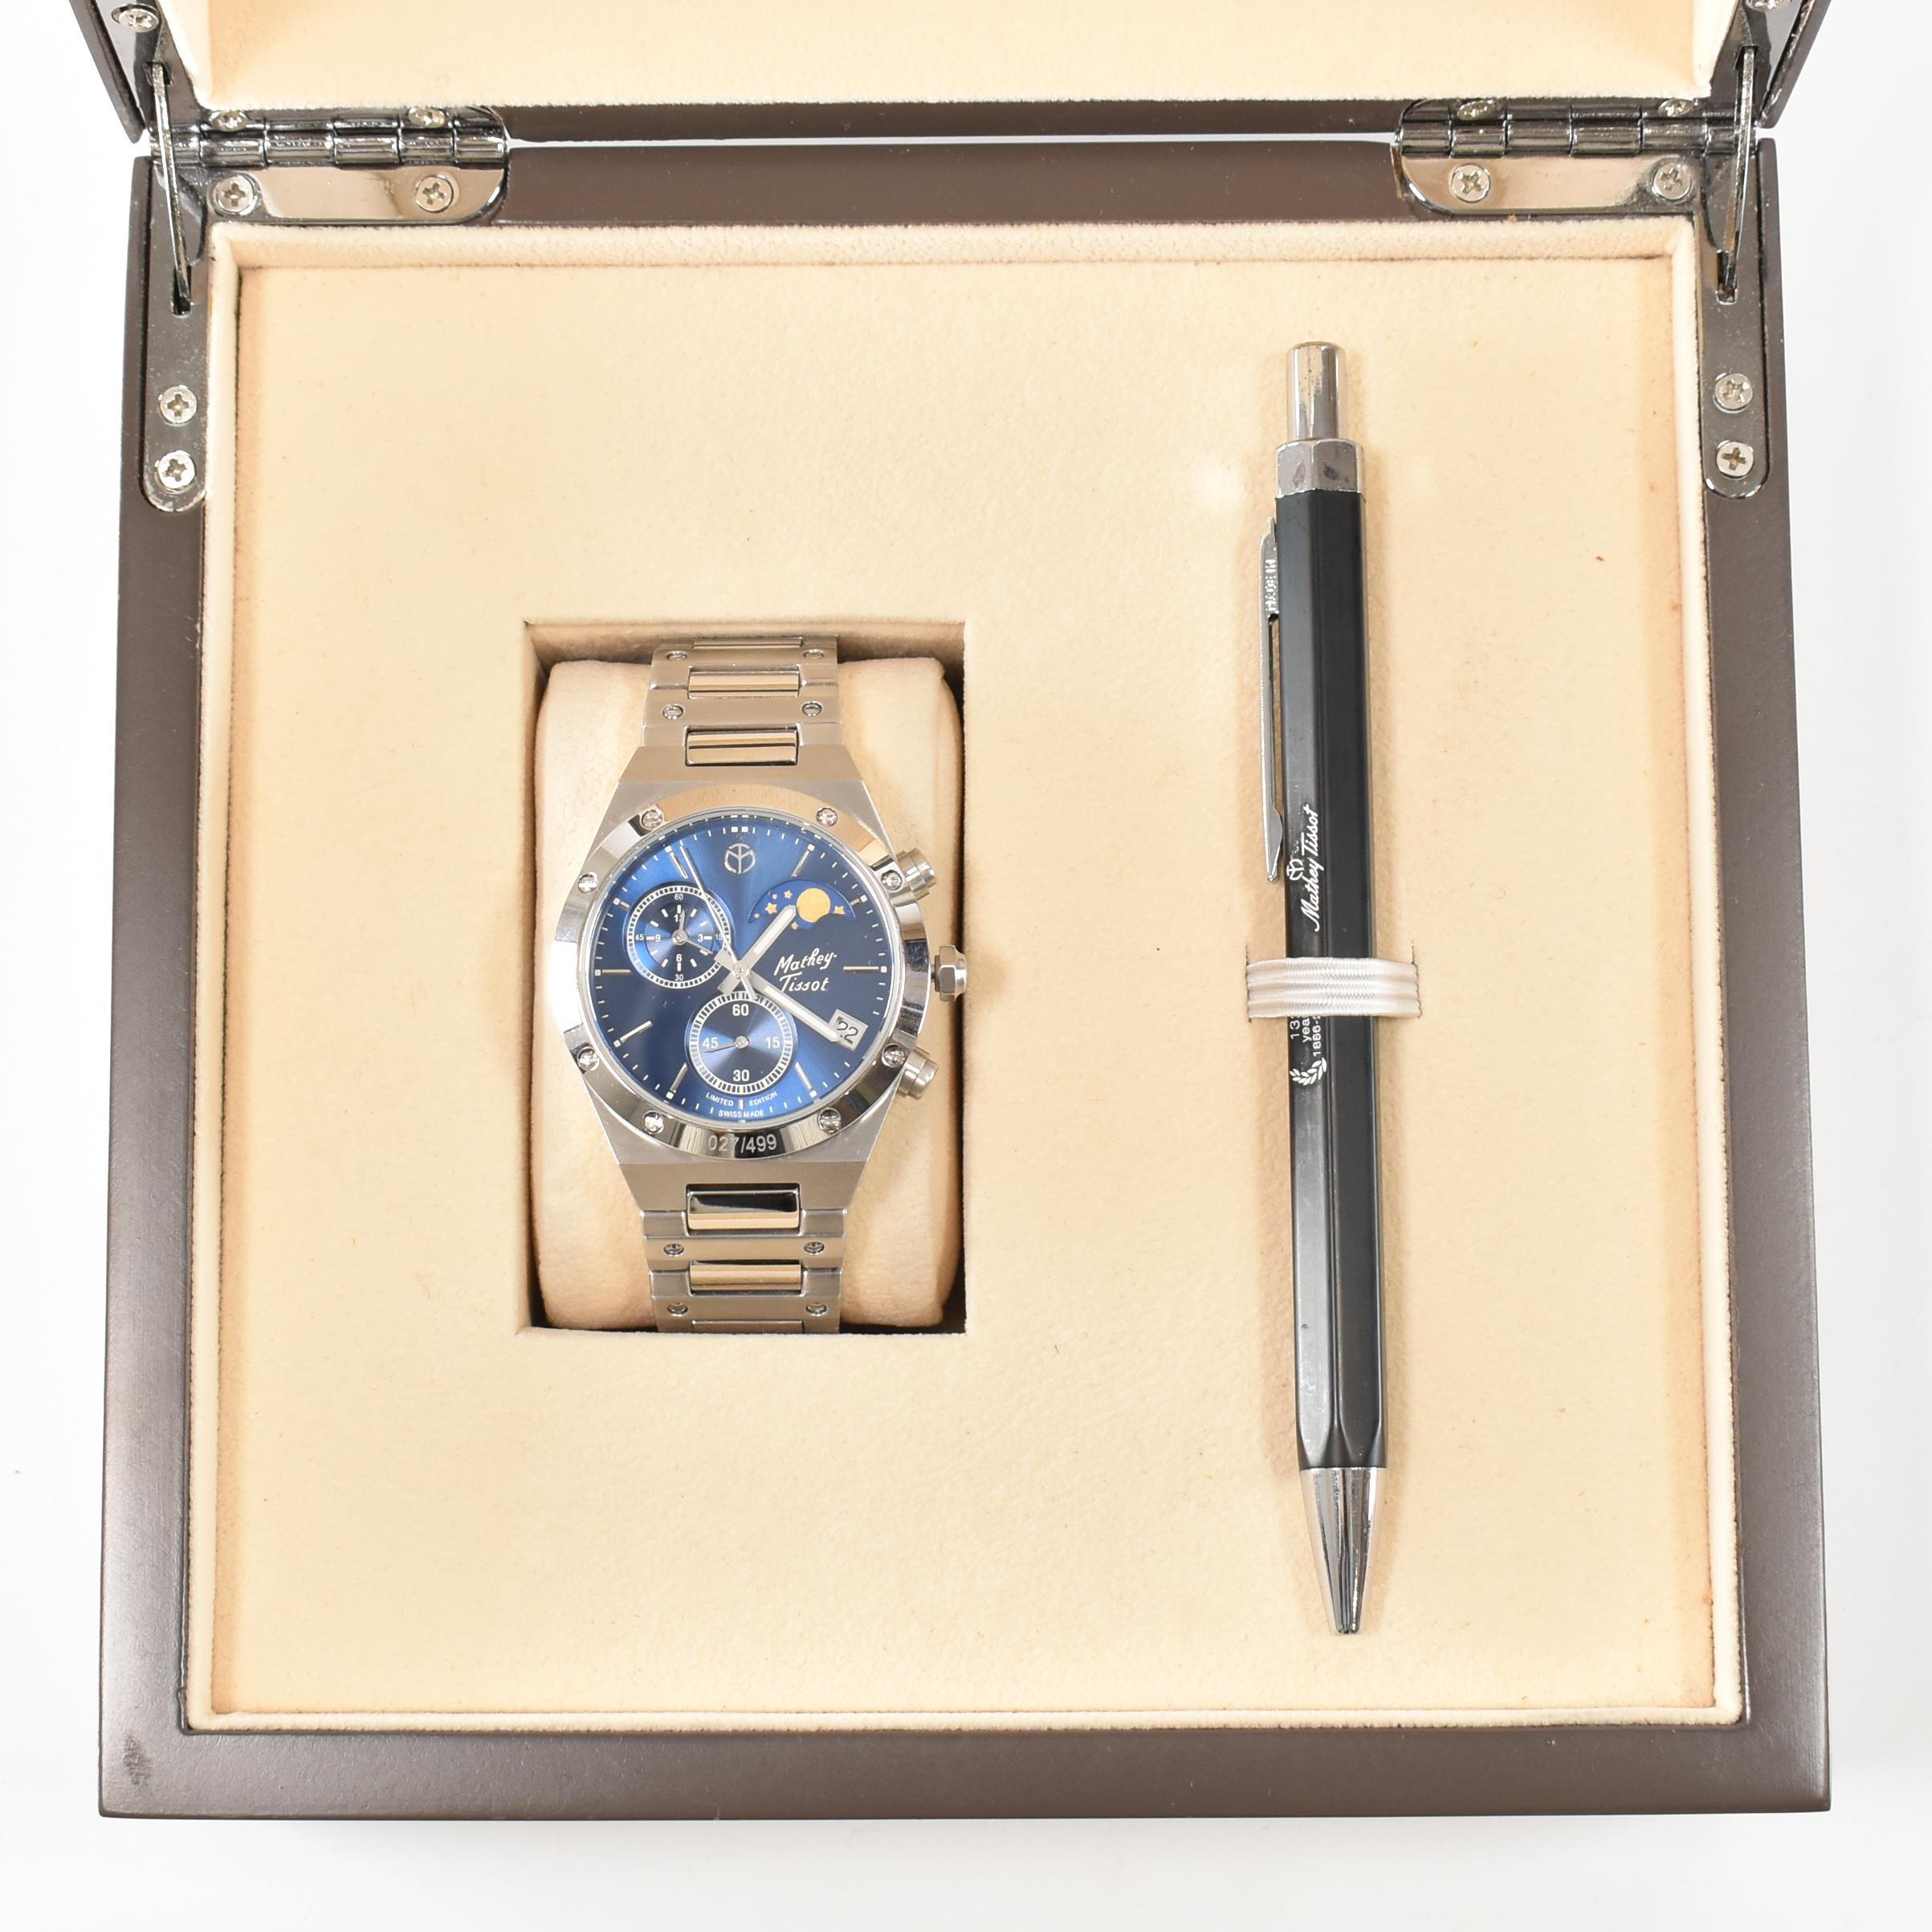 MATHEY - TISSOT LIMITED EDITION STAINLESS STEEL WRIST WATCH - Image 11 of 13